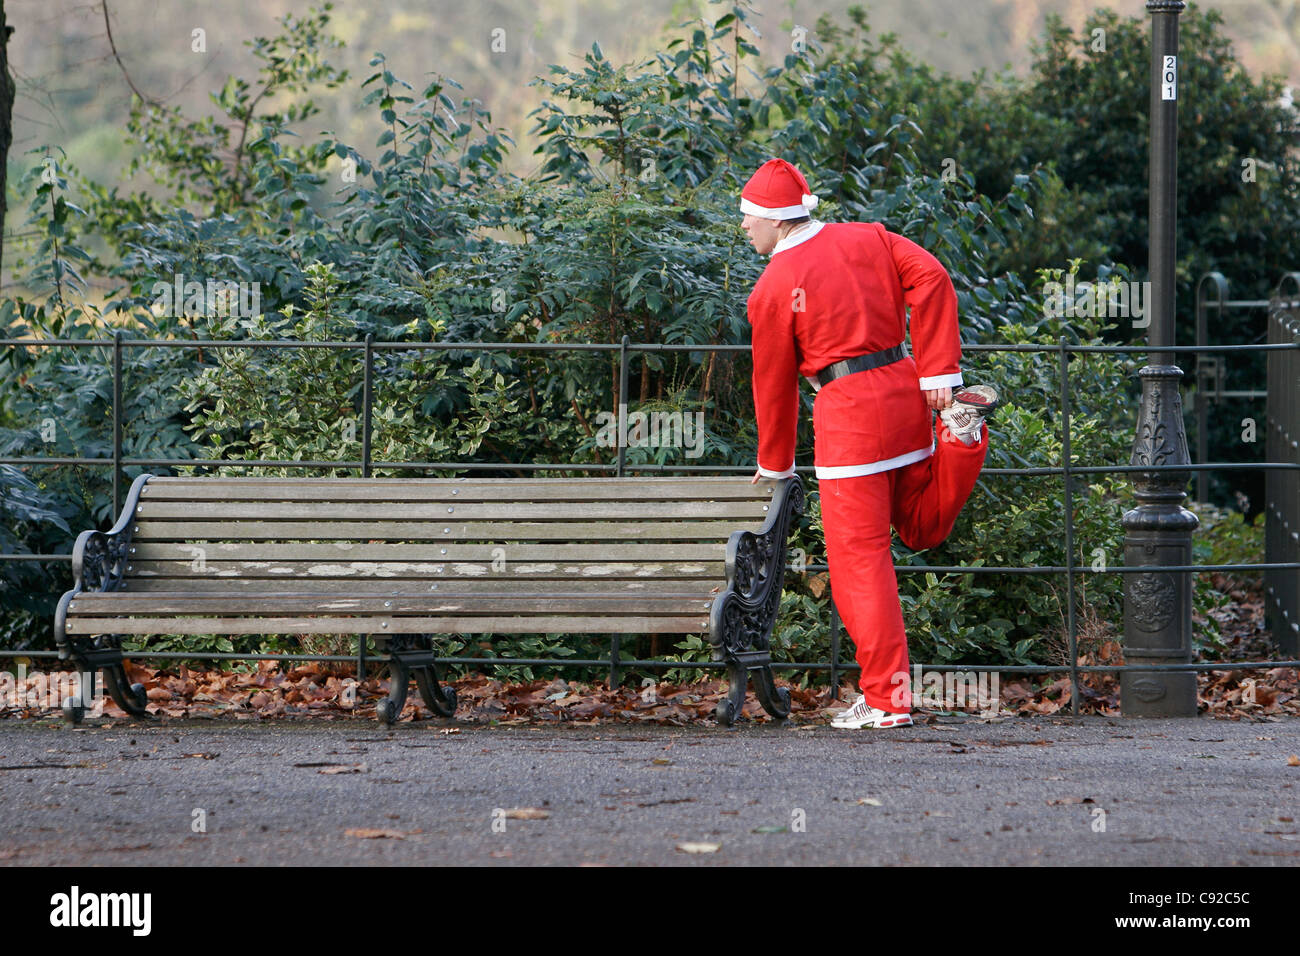 The quirky annual London Santa Run, held at the beginning of December, in Battersea Park, London, England Stock Photo